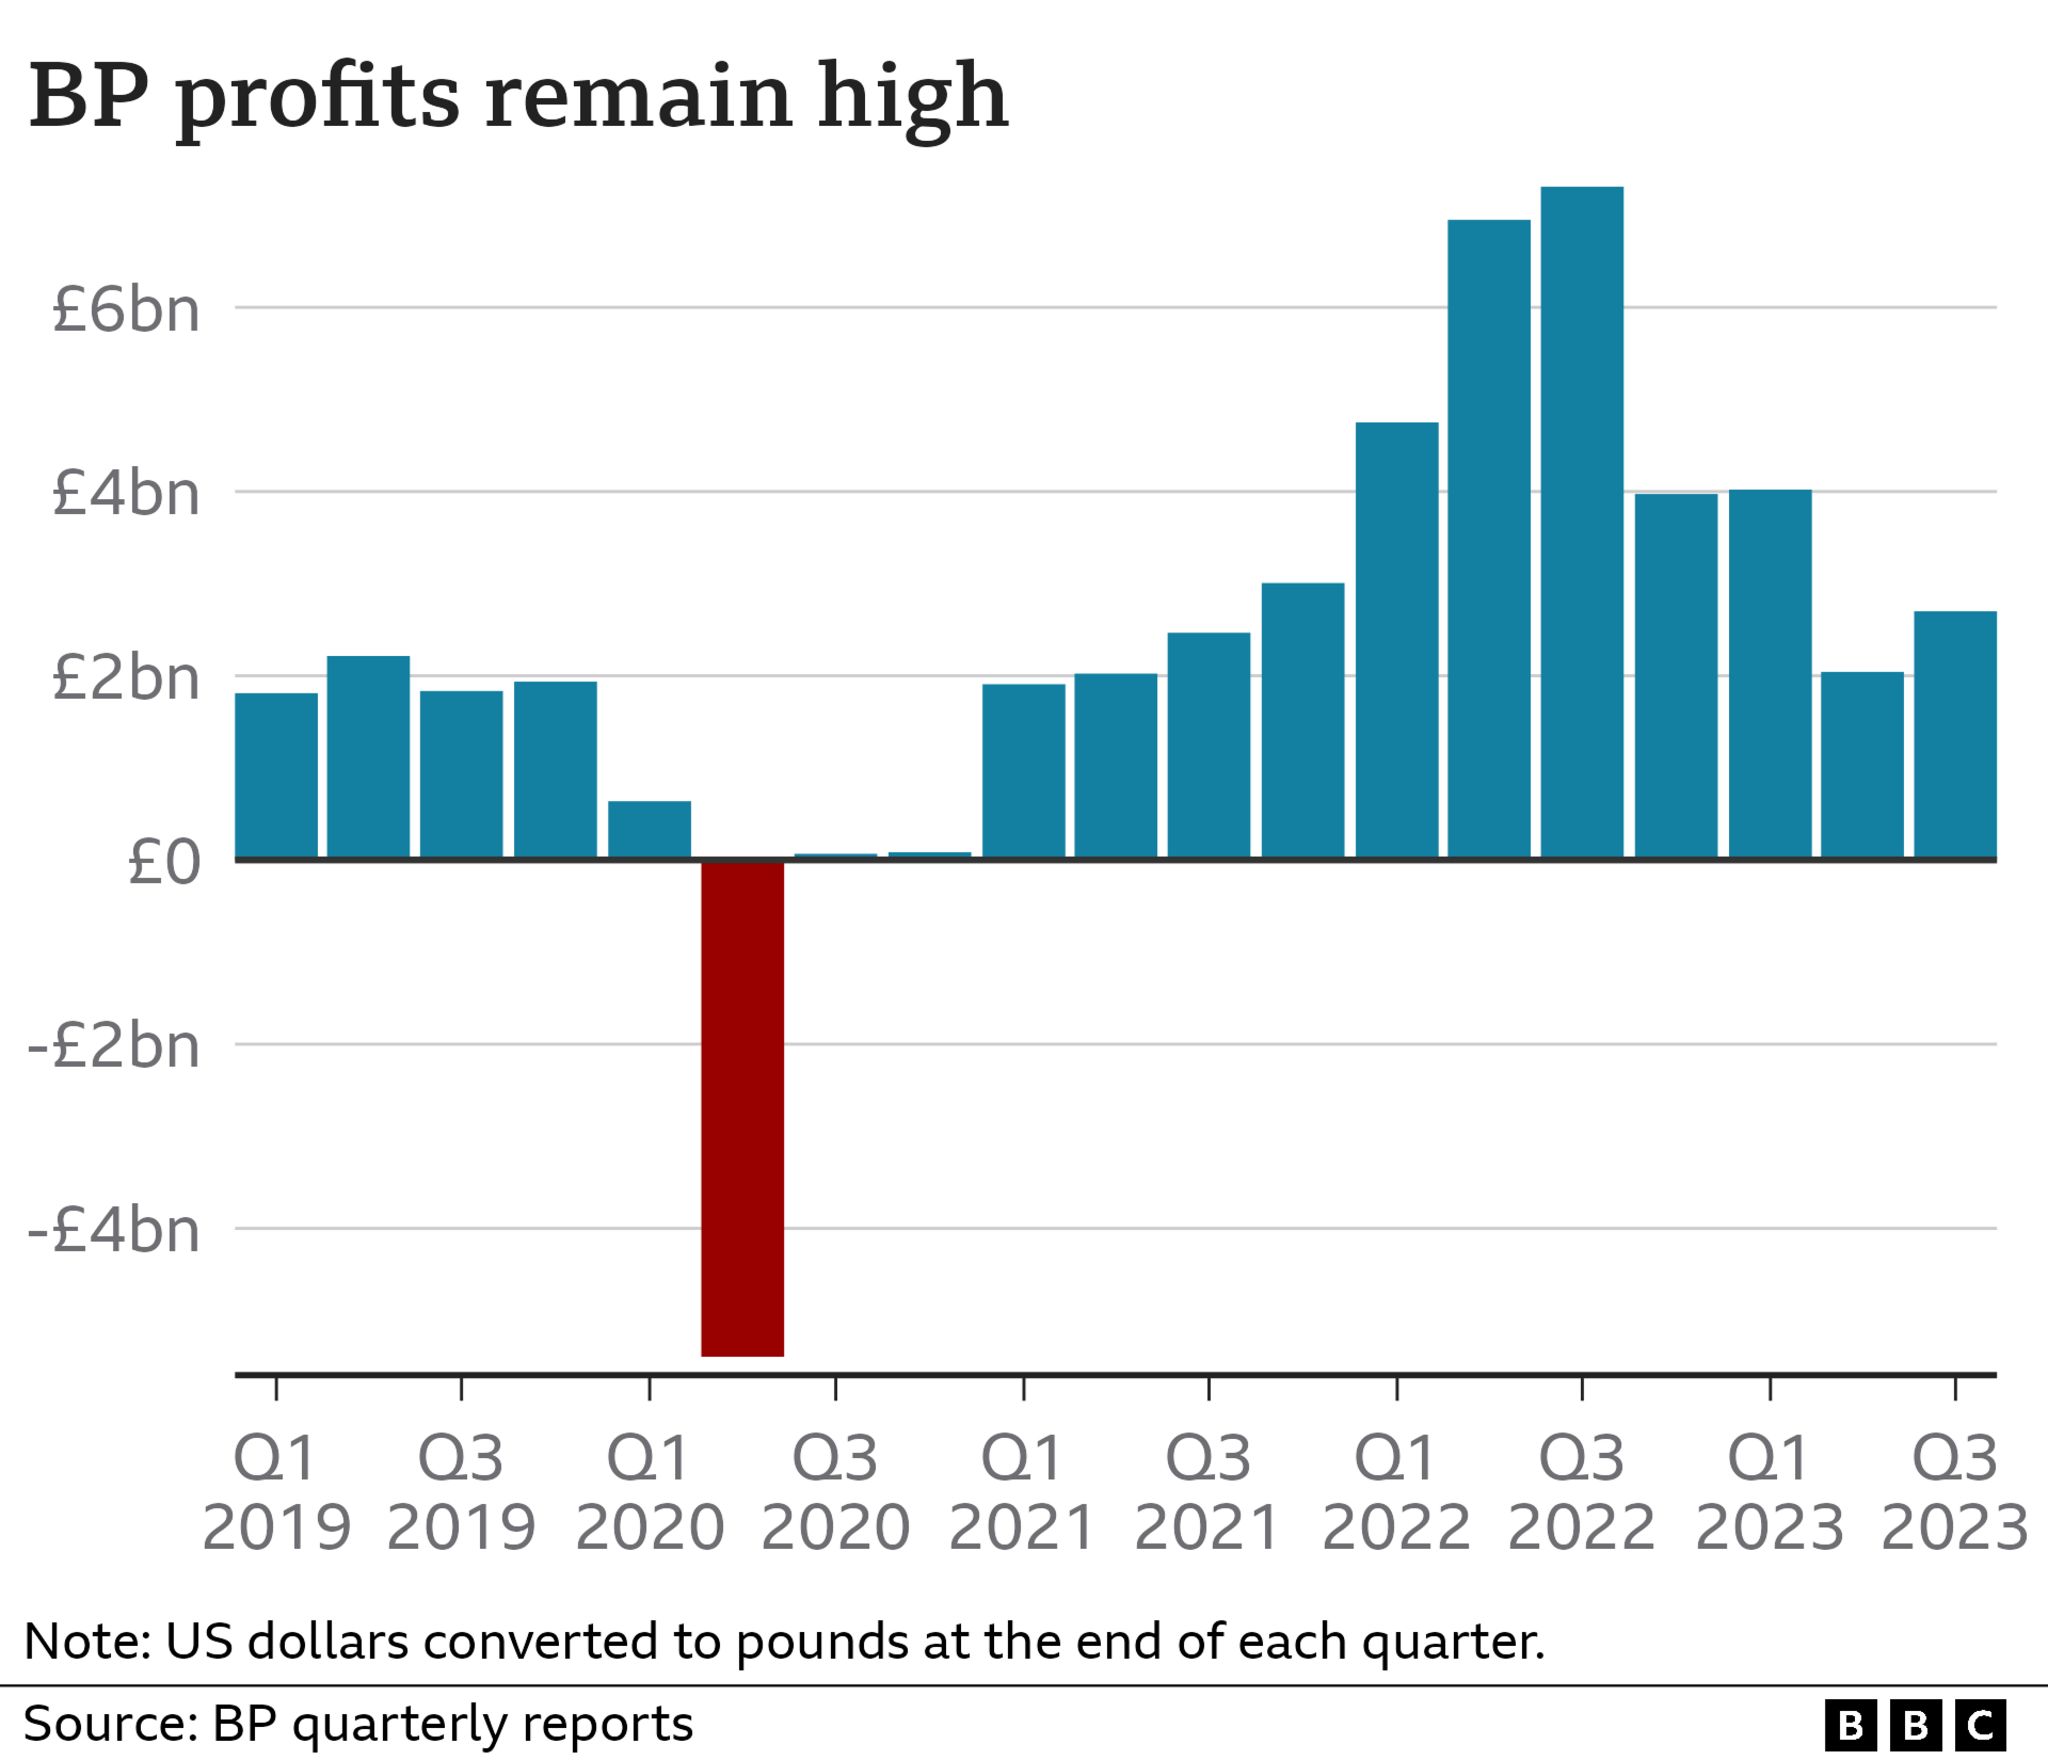 Alt: Bar chart showing BP quarterly profits. In July-September 2023, the company made a profit of £2.7bn